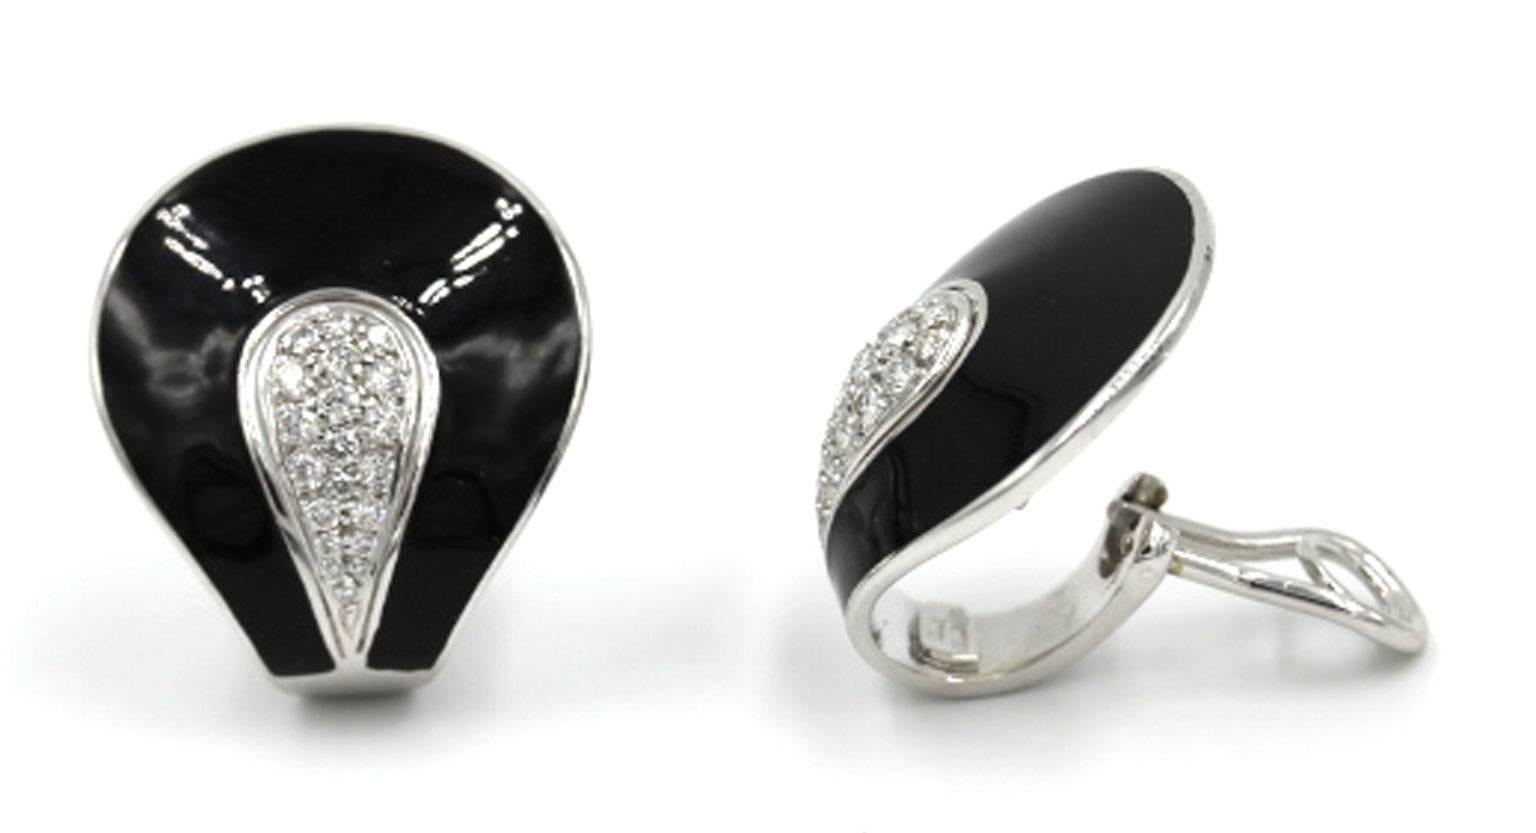 Stunning and fashionable 18 karat white gold earrings by designer Roberto Coin. These earrings feature .53 carat total weight of diamonds surrounded by black enamel. They have an omega back and retractable post so that they can be worn as clip on,